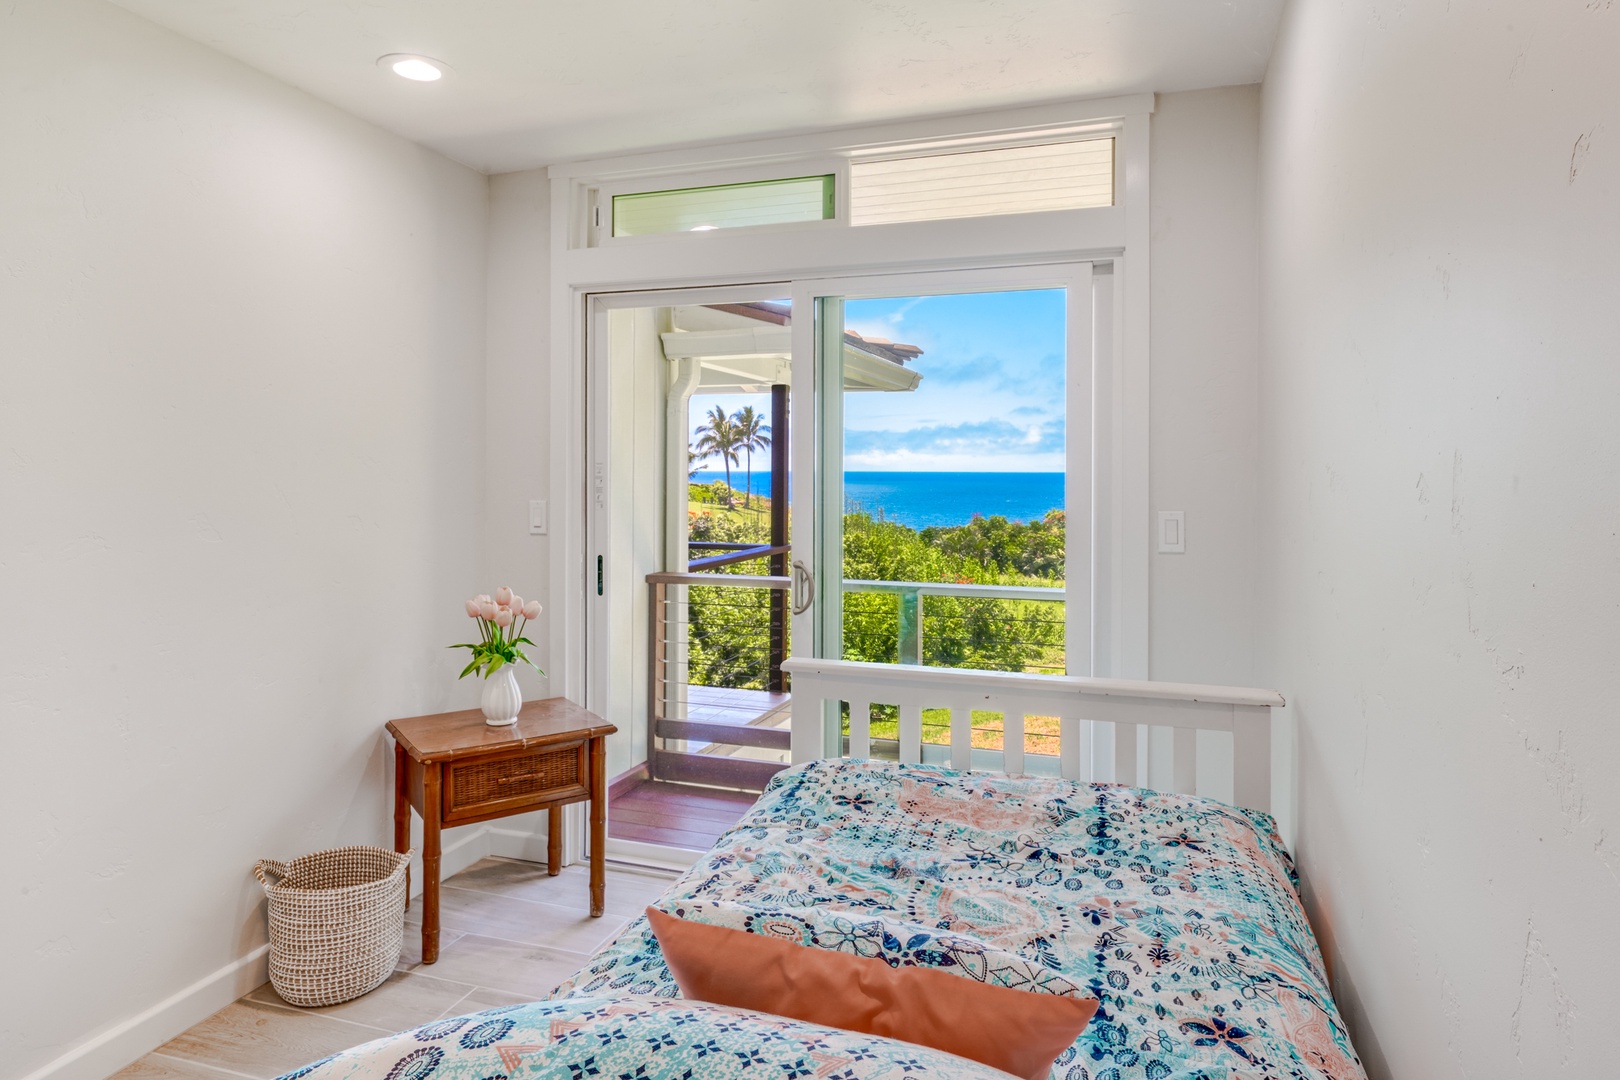 Princeville Vacation Rentals, Wai Lani - Third guest suite with a twin bed and private balcony